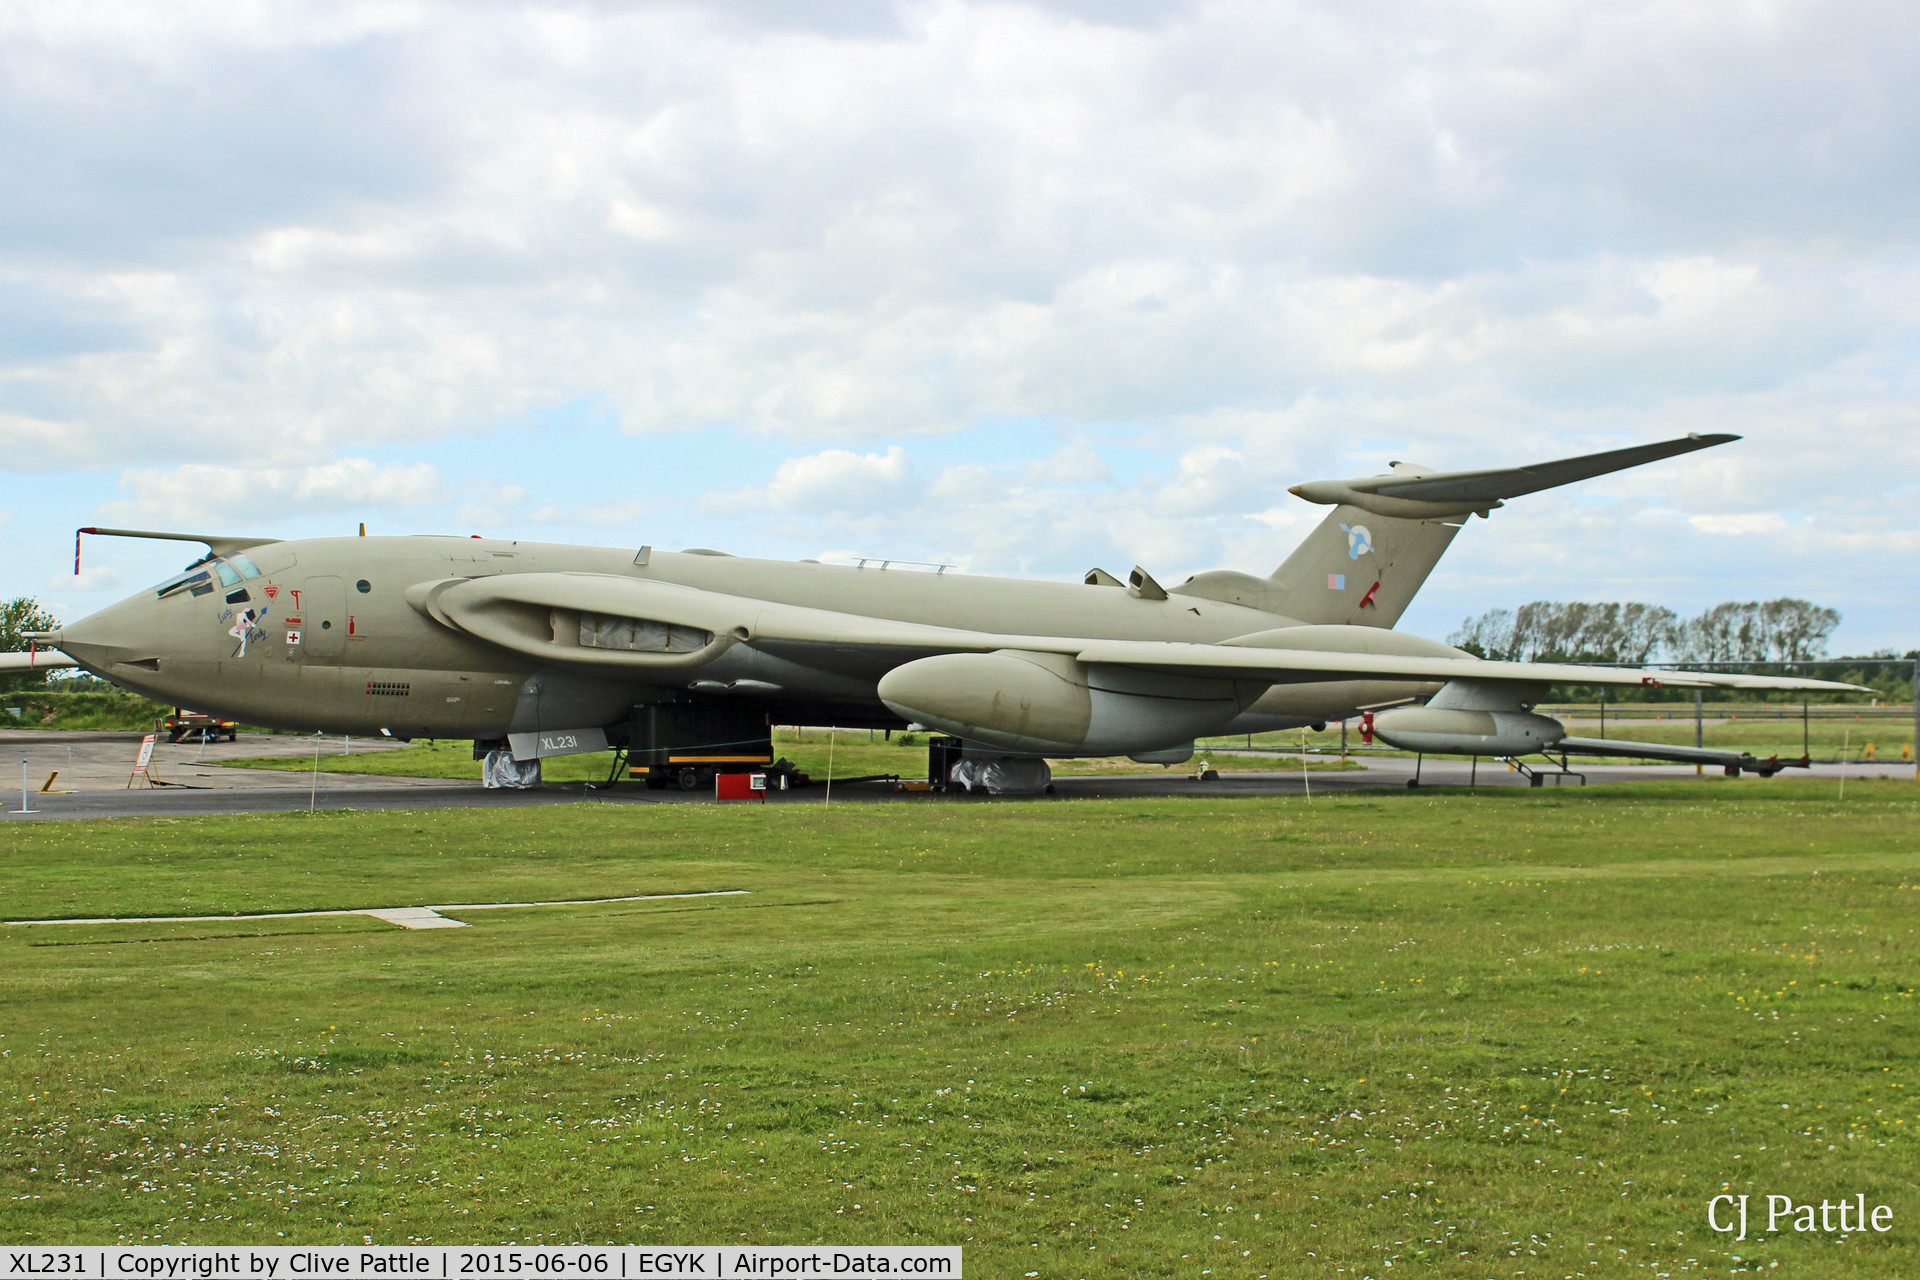 XL231, 1962 Handley Page Victor K.2 C/N HP80/76, Preserved @ The Yorkshire Air Museum, Elvington, Yorkshire